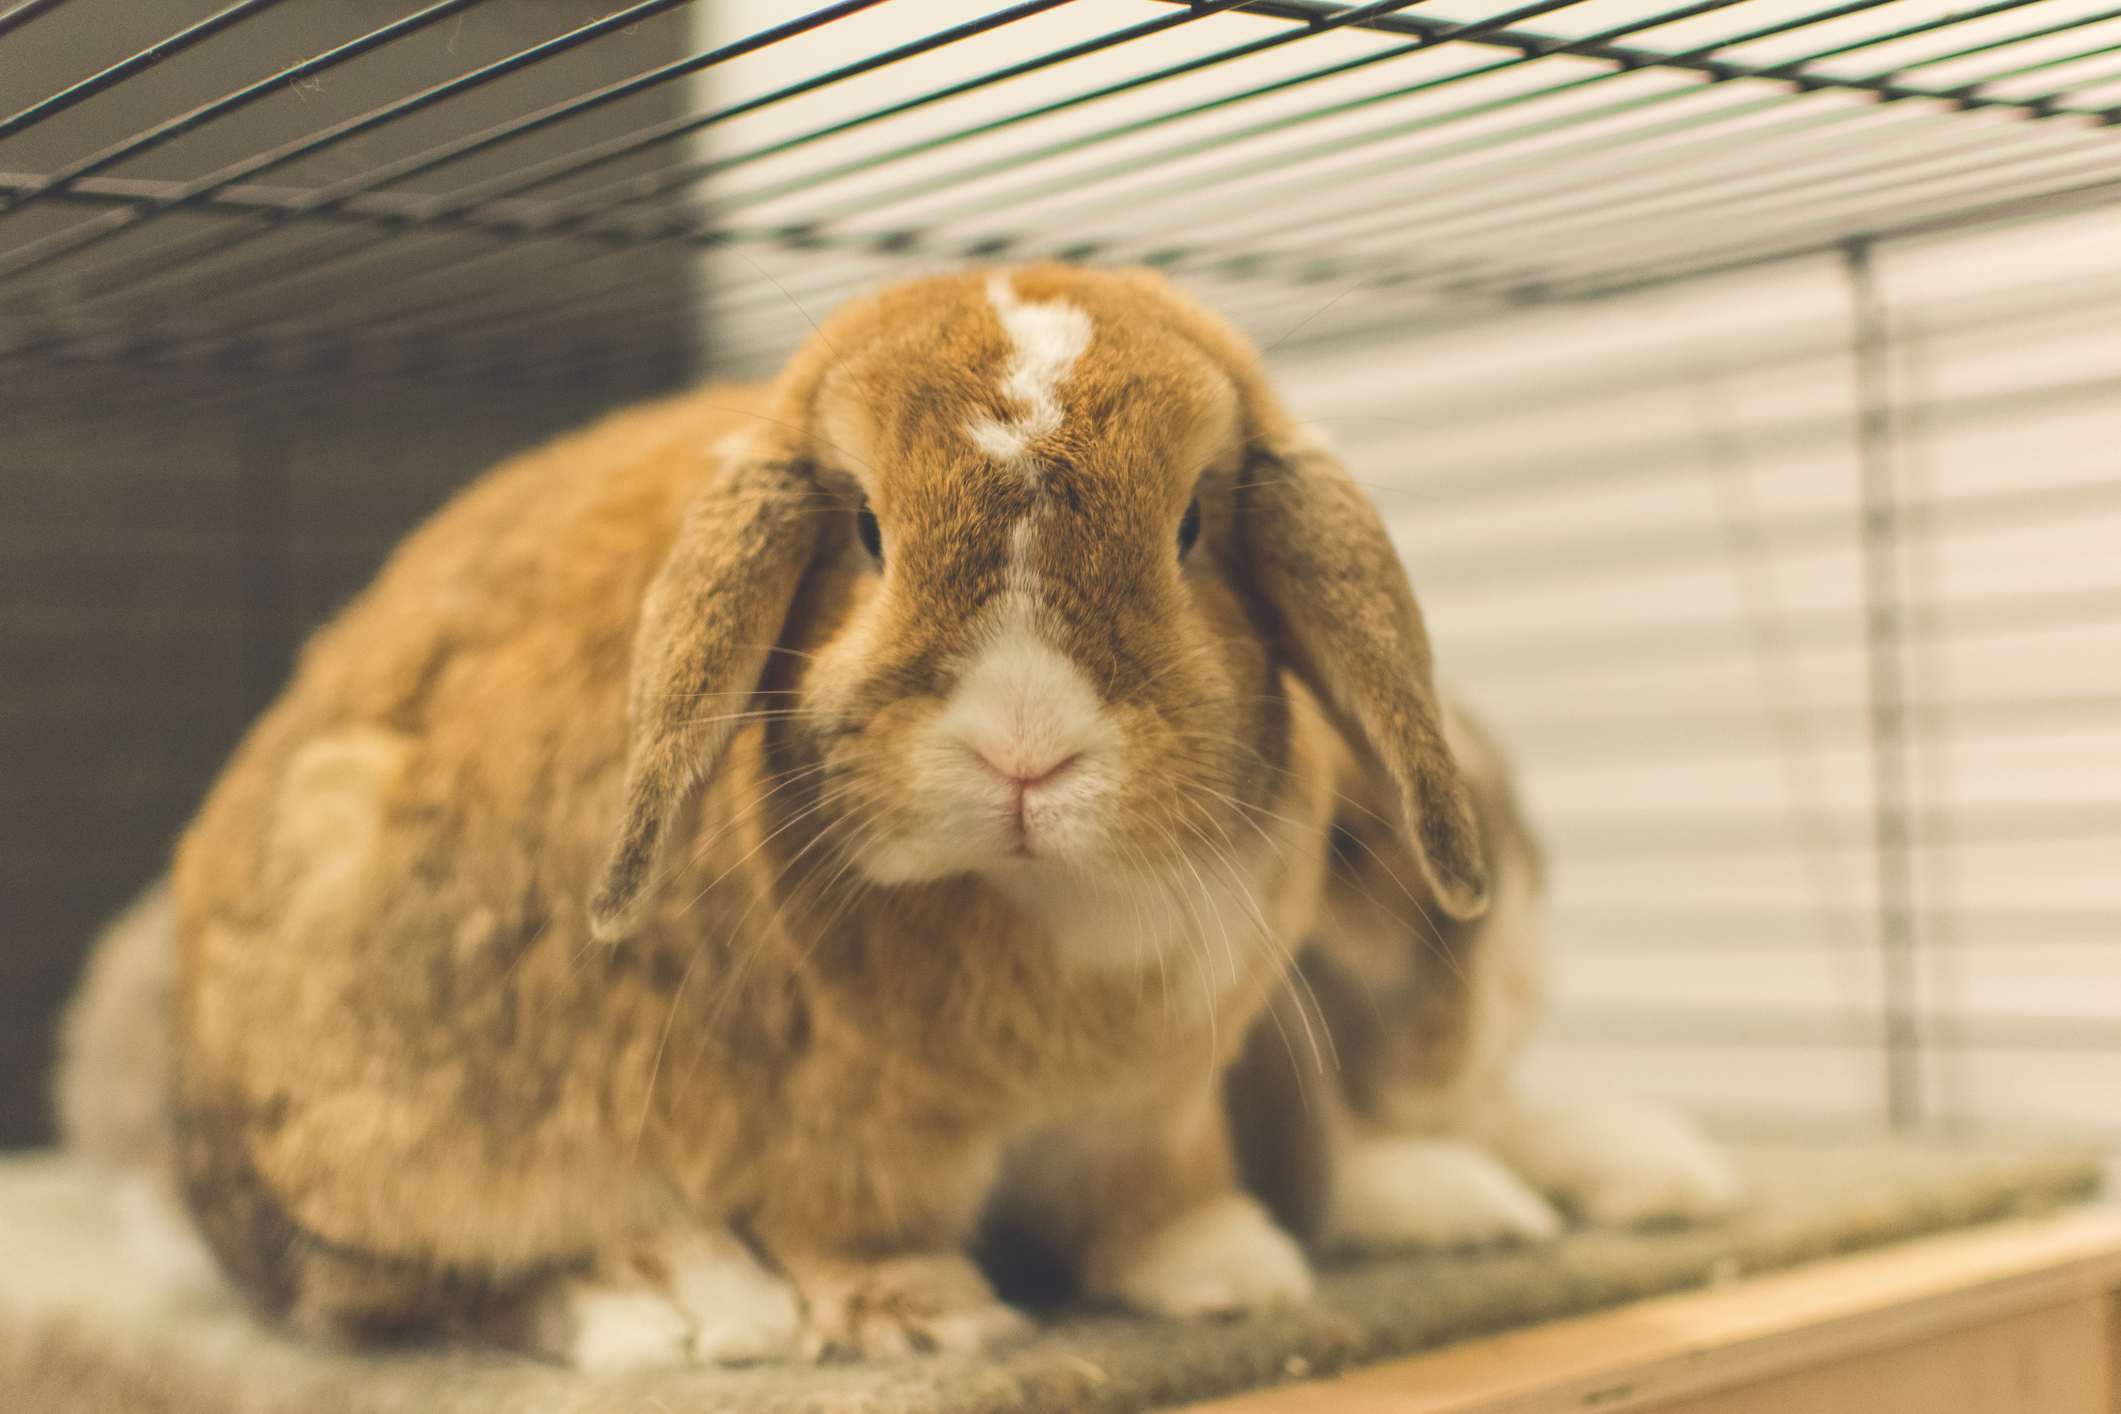 Lop-eared rabbit in cage